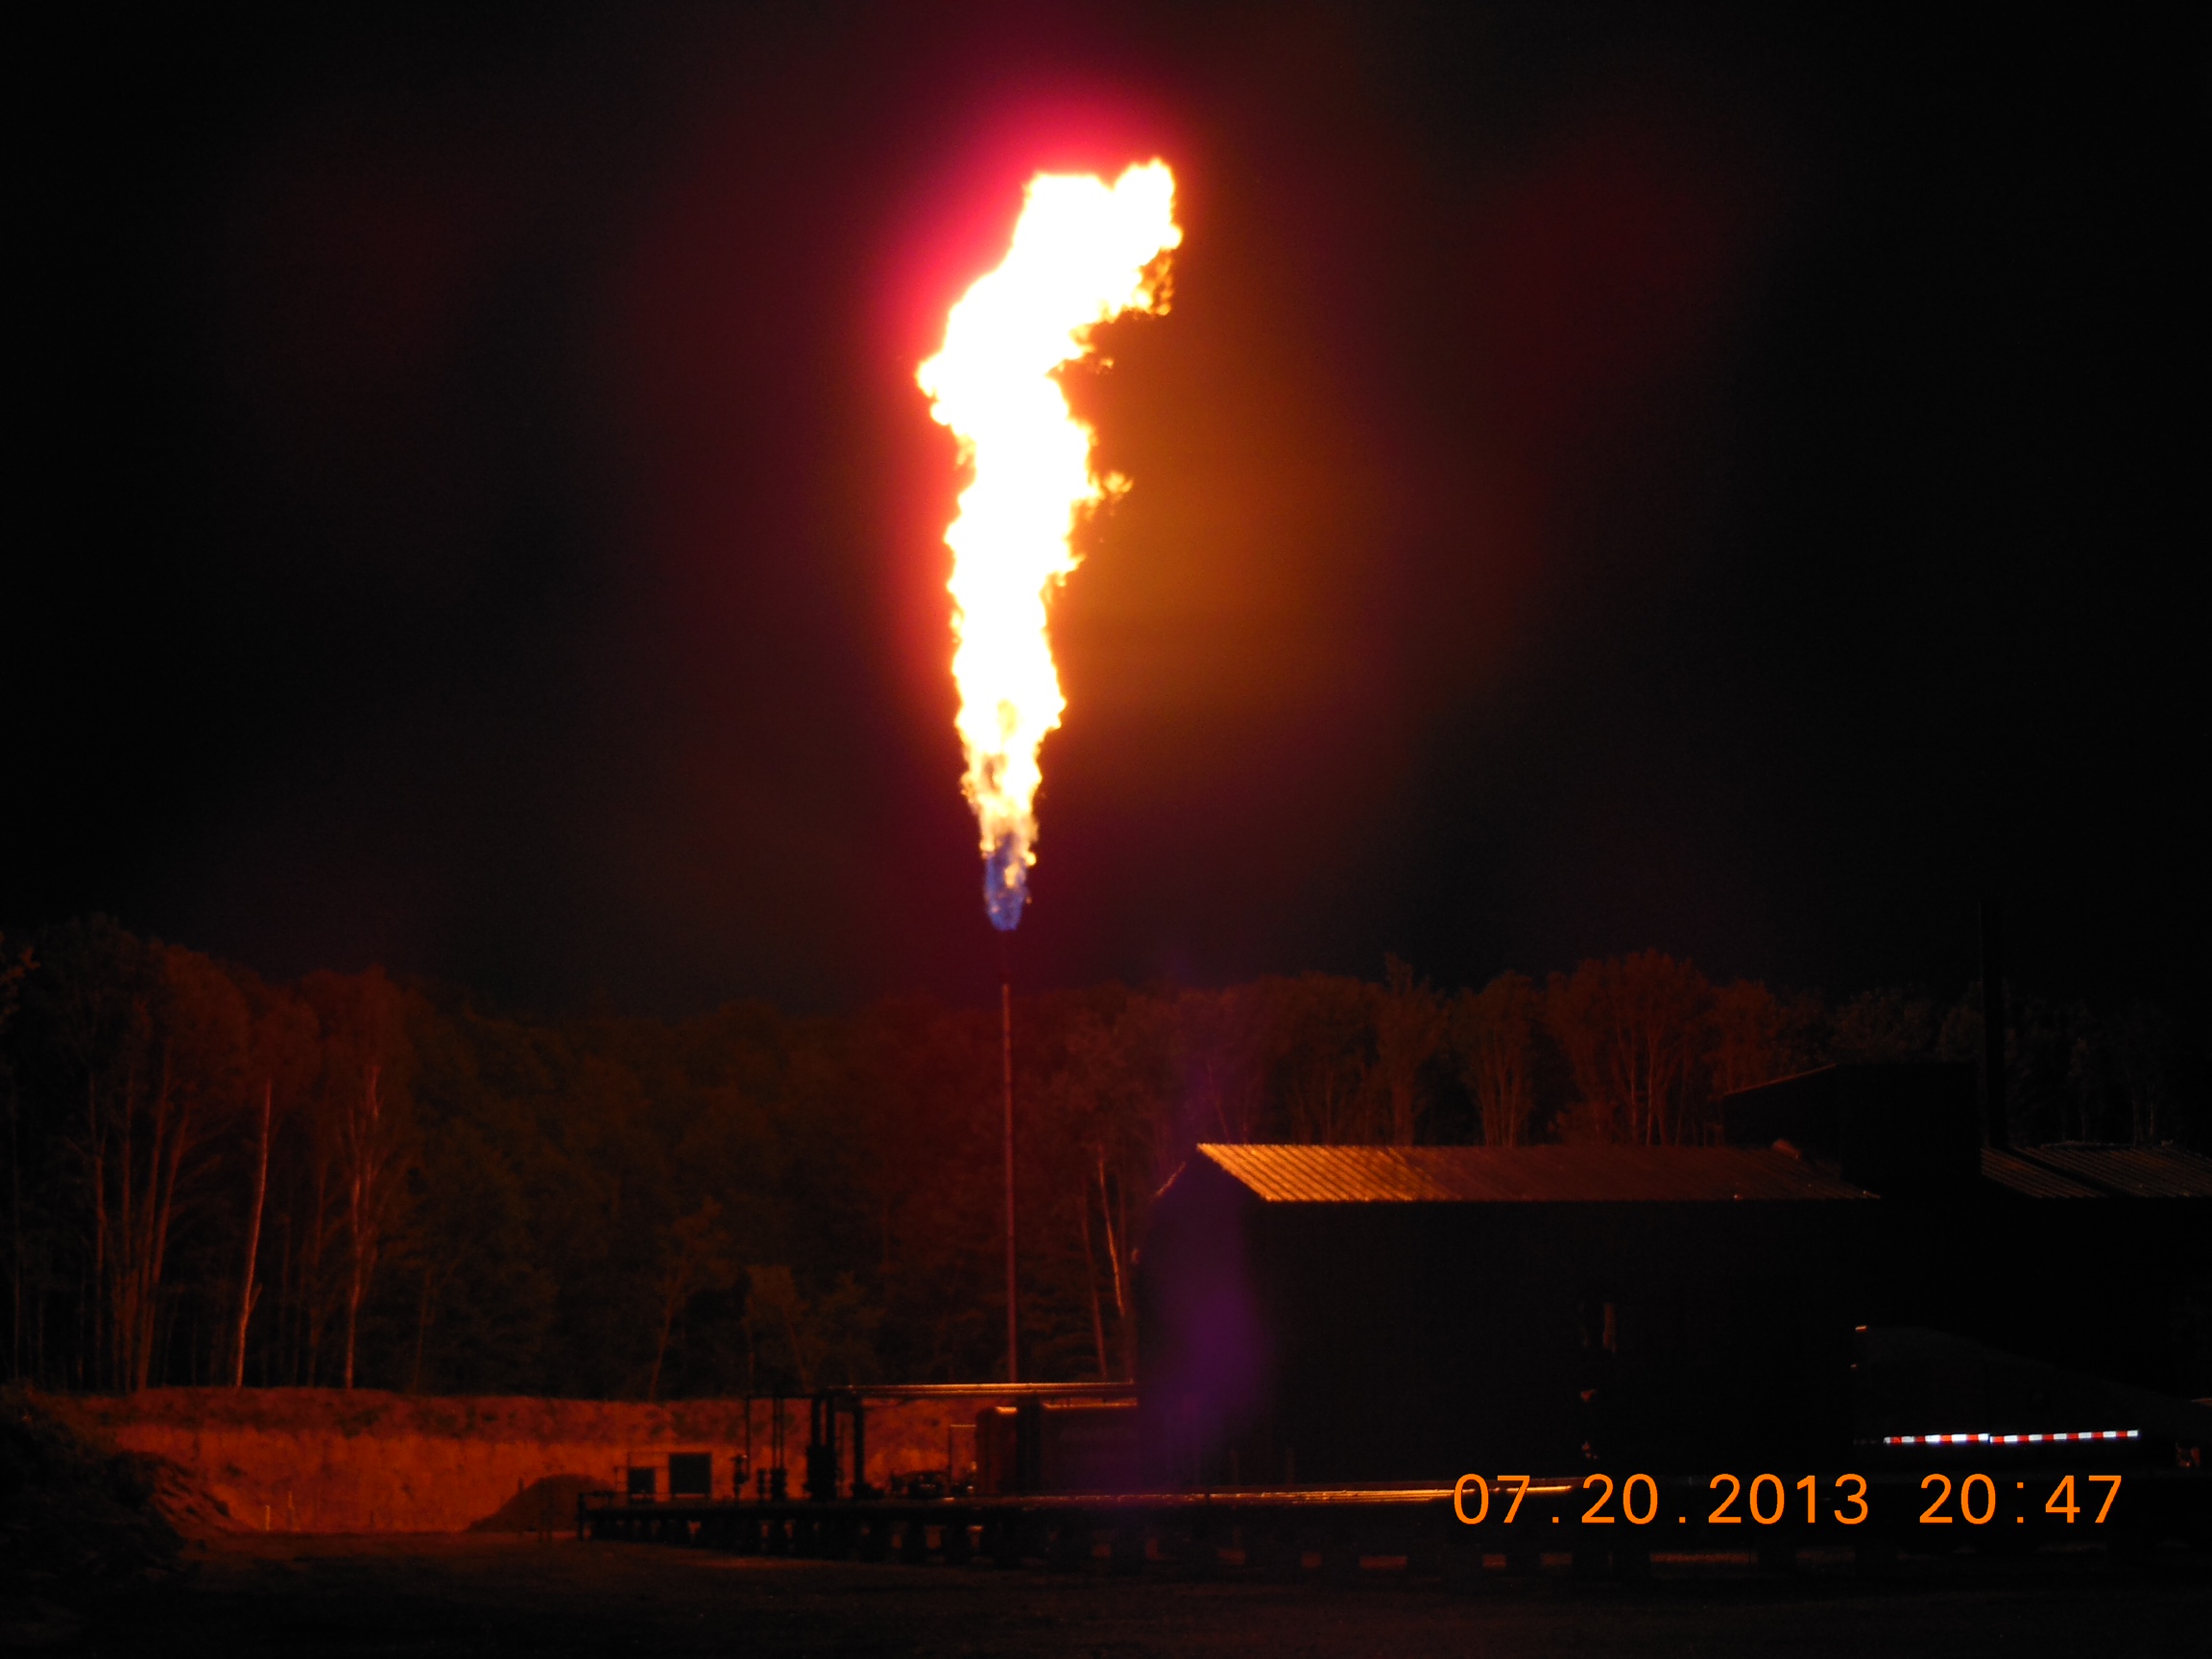 State Garfield 1-25 HD1 being flow tested & flared. Fire fighters arrived this night with their lights flashing thinking the Michigan State Forest had burst into flames bc no one had told them to expect this flare test. They, like everyone else, had never seen a flare test from Michigan's Collingwood Shale.